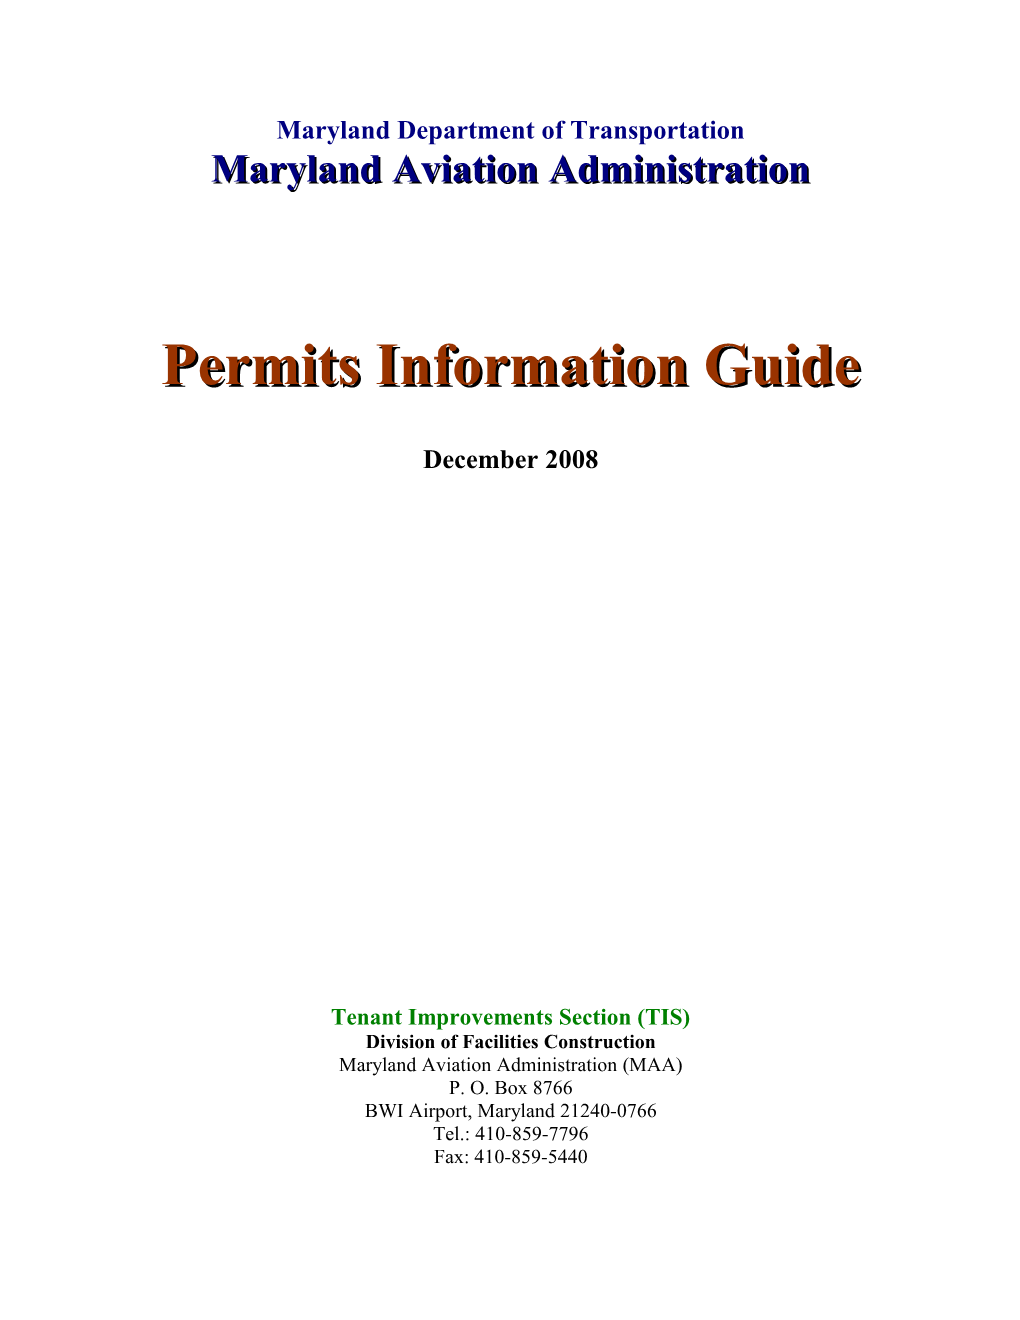 Maryland Aviation Administration Permit Information Guide